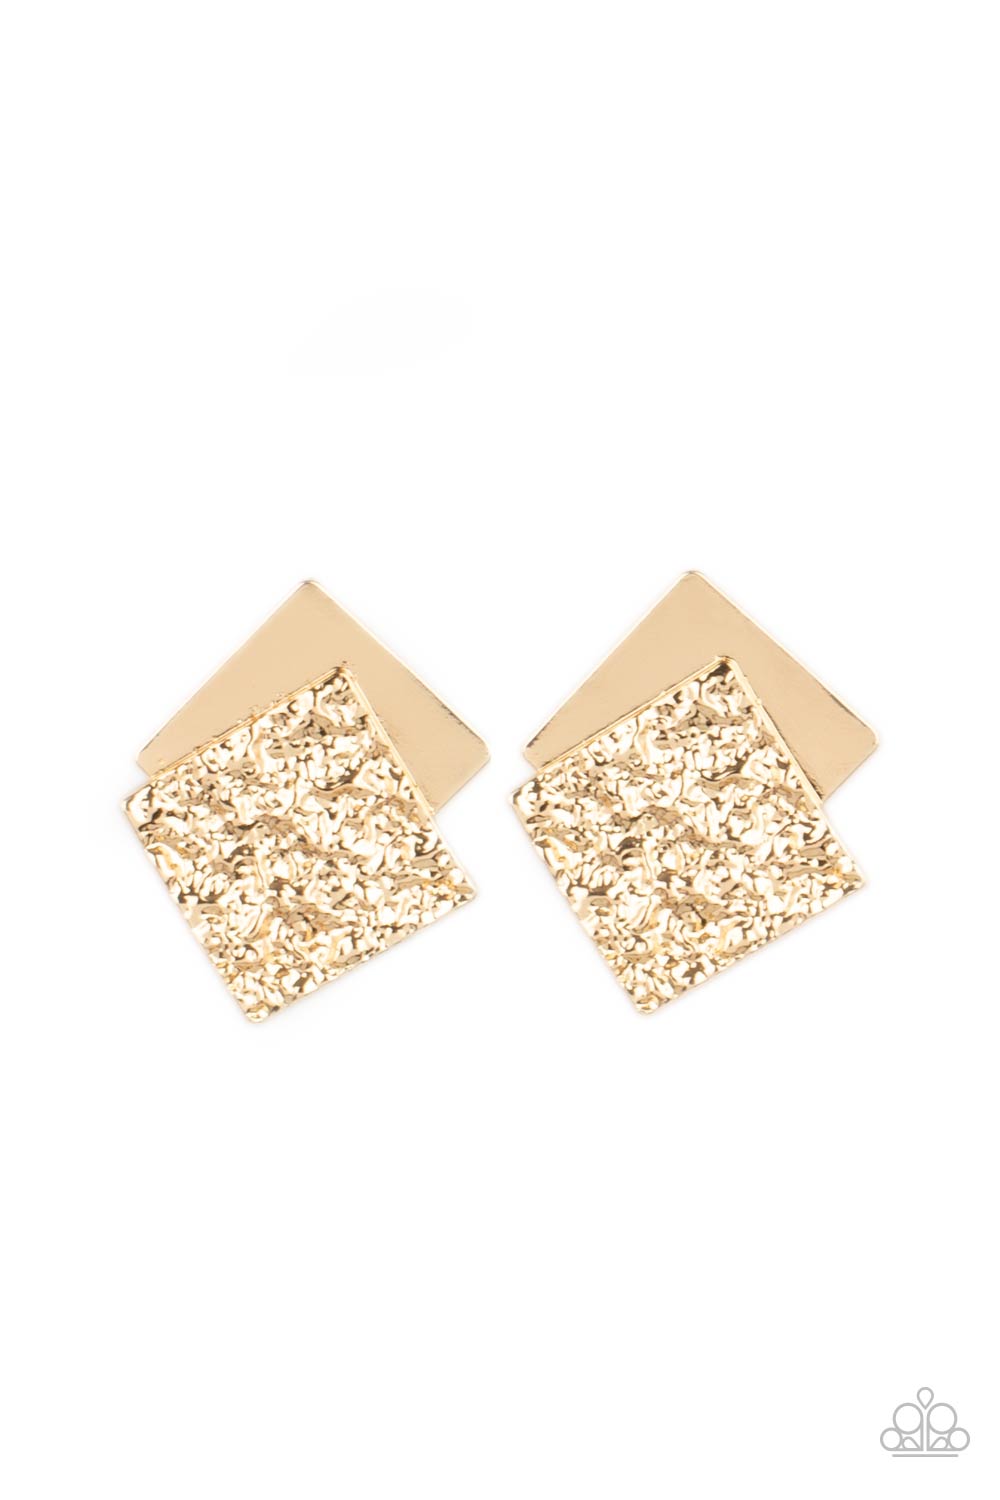 Square With Style - Gold Post Earring freeshipping - JewLz4u Gemstone Gallery